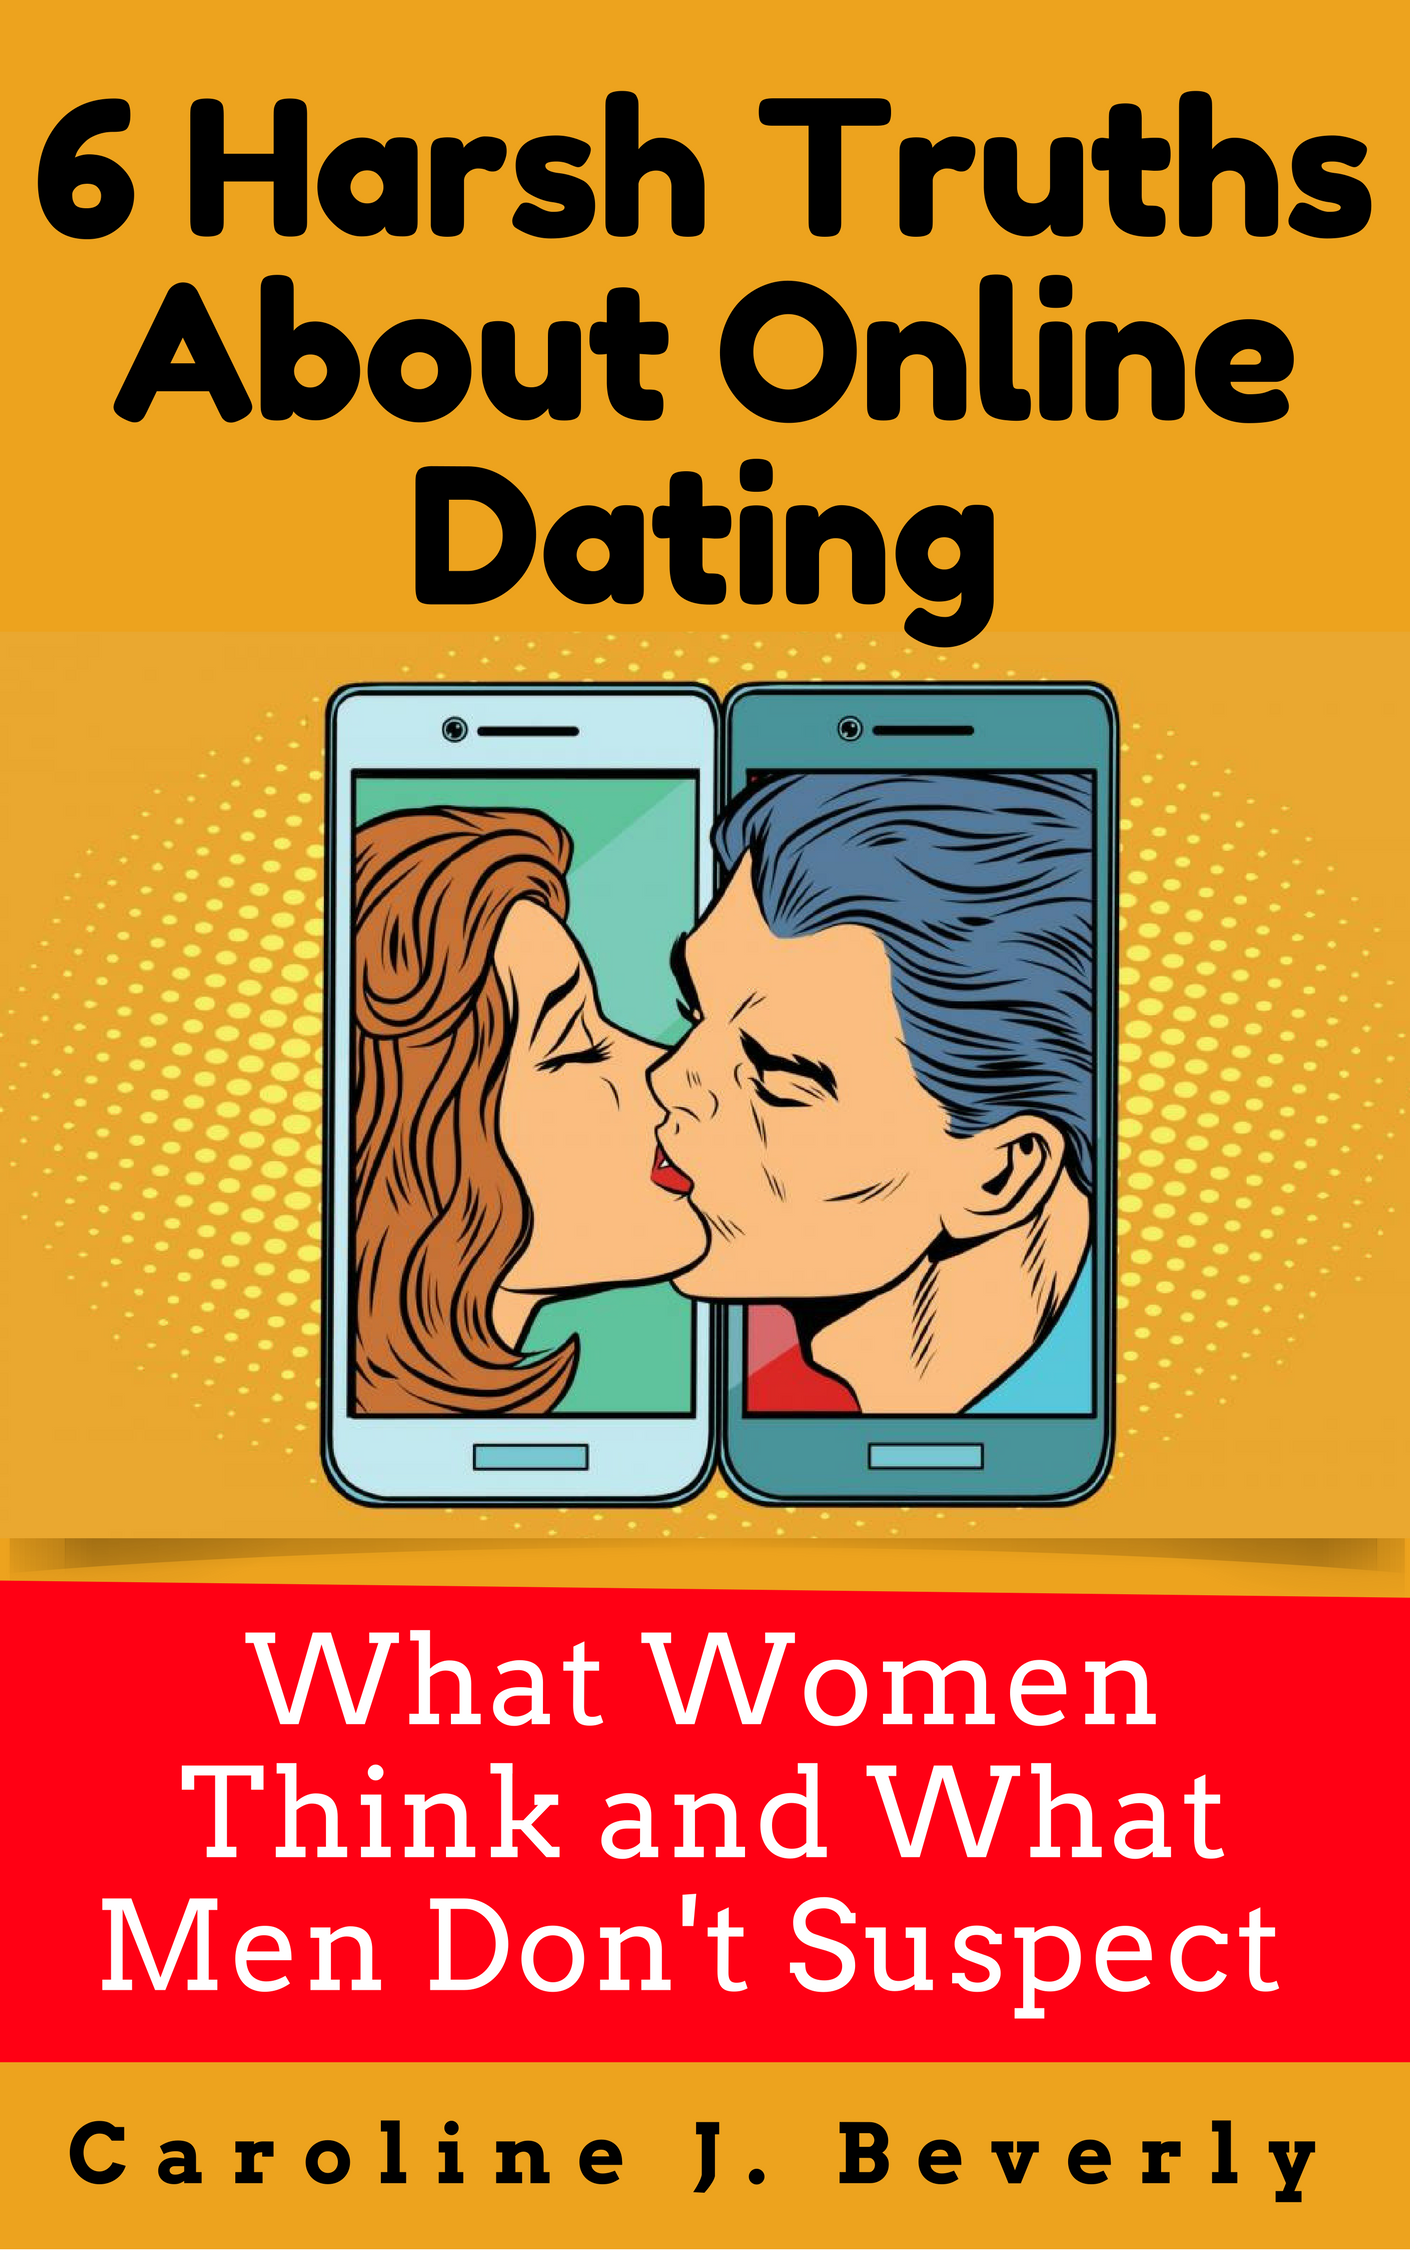 FREE: 6 Harsh Truths About Online Dating: What Women Think and What Men Don’t Suspect by Caroline J. Beverly